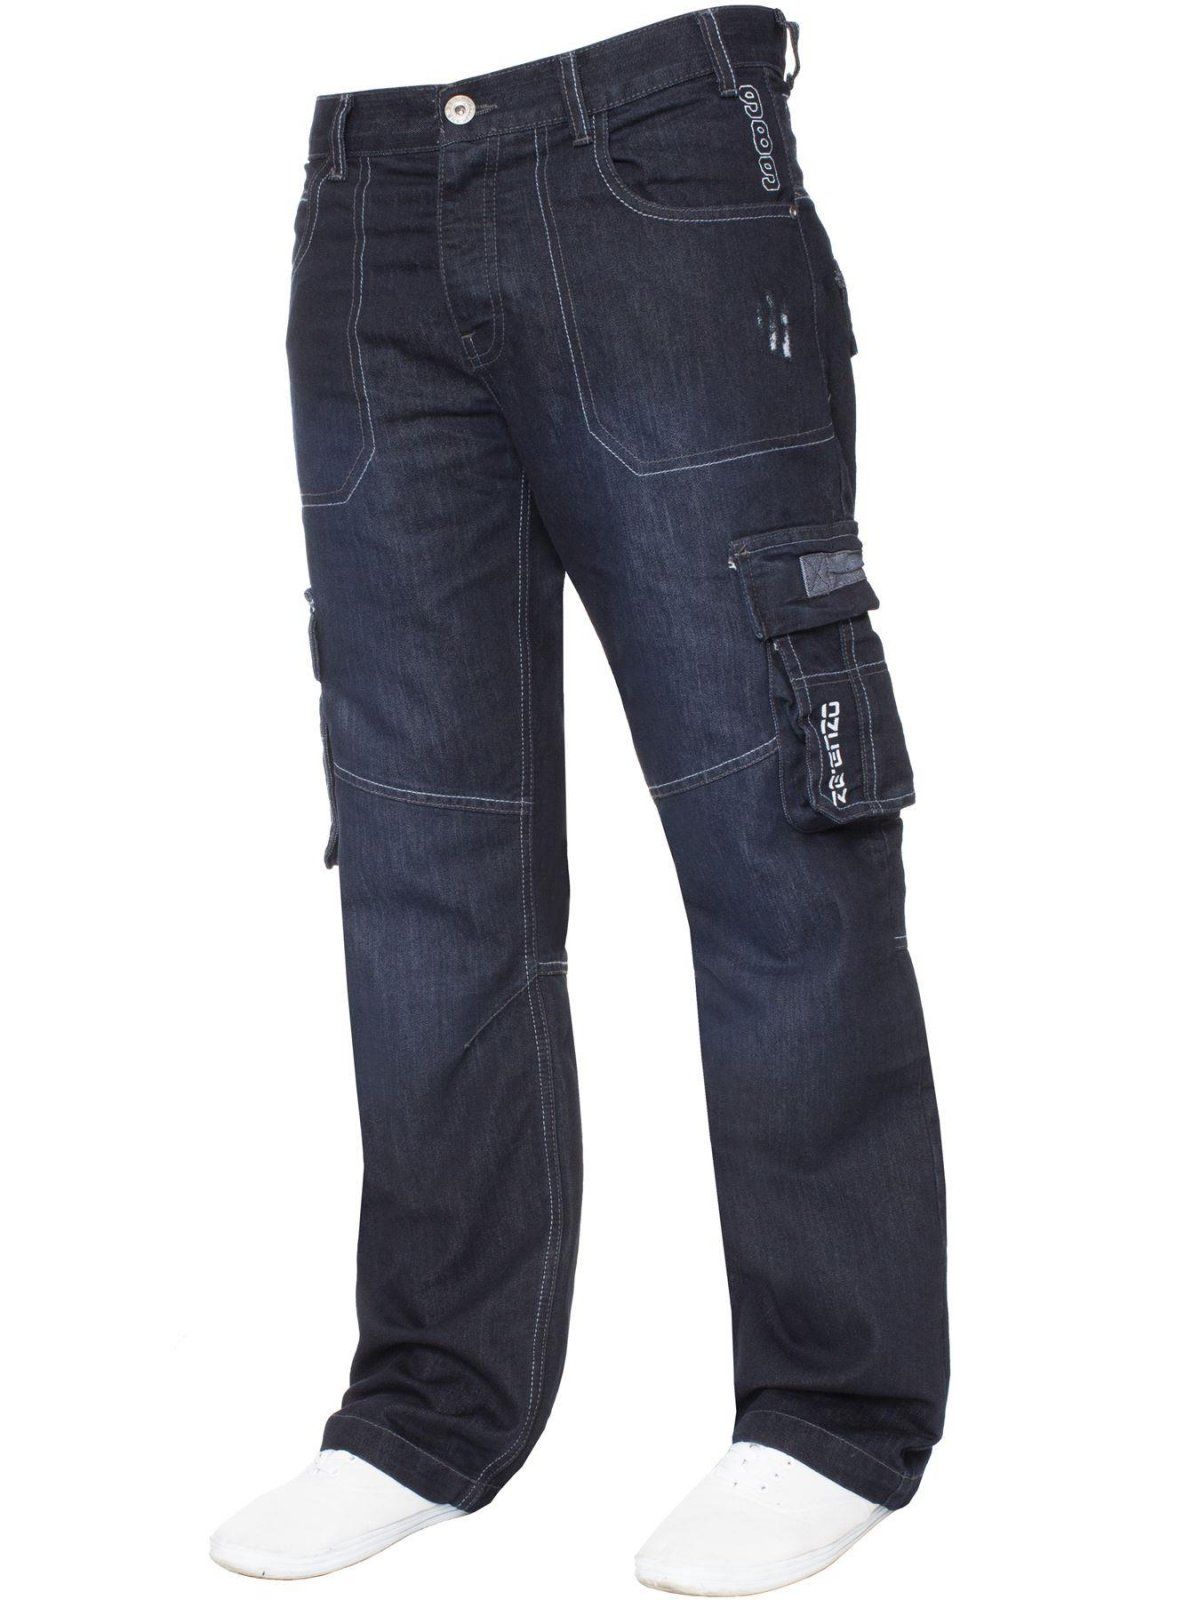 Go back to your roots with these comfortable 7 pocket dark blue combat jeans, featuring cinch buckle to back and draw cords to the bottom of the leg for a more custom fit. Finished off with printed branding to front and back, subtle distressed detail and button fly for a comfort fit.